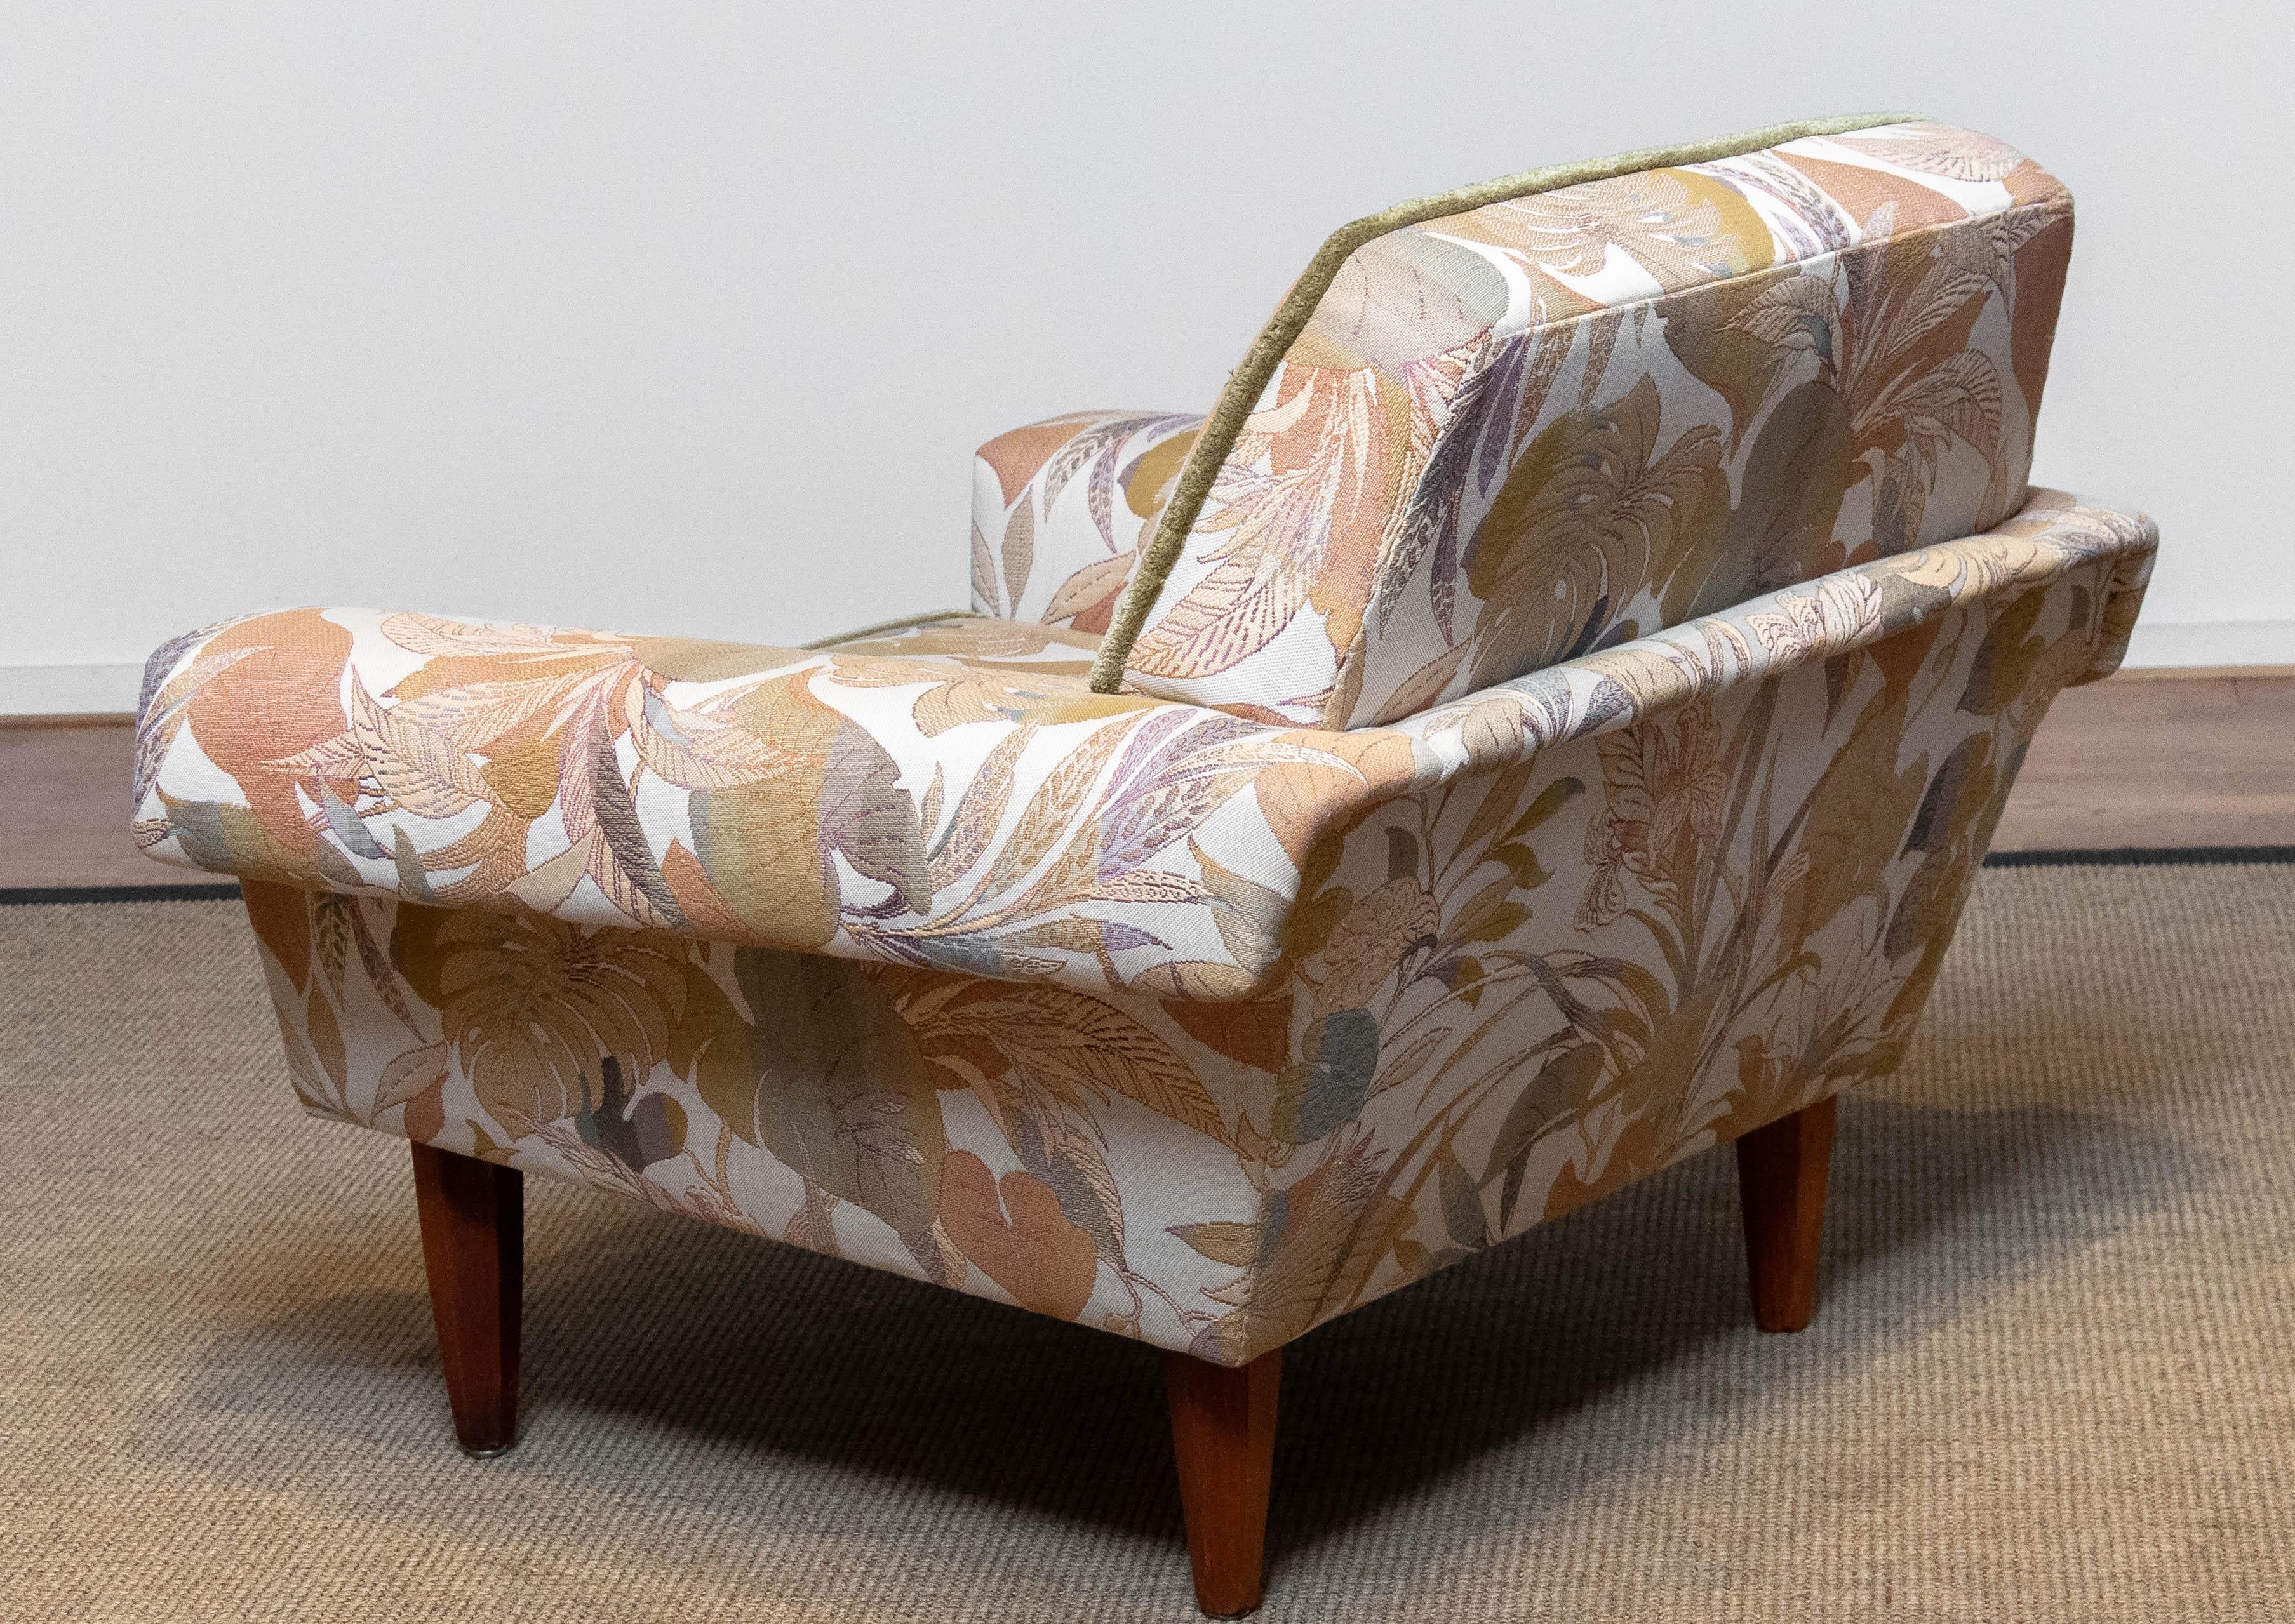 Mid-20th Century Danish Low Back Lounge Chair Upholstered Floral Jacquard Fabric from the 1970's For Sale